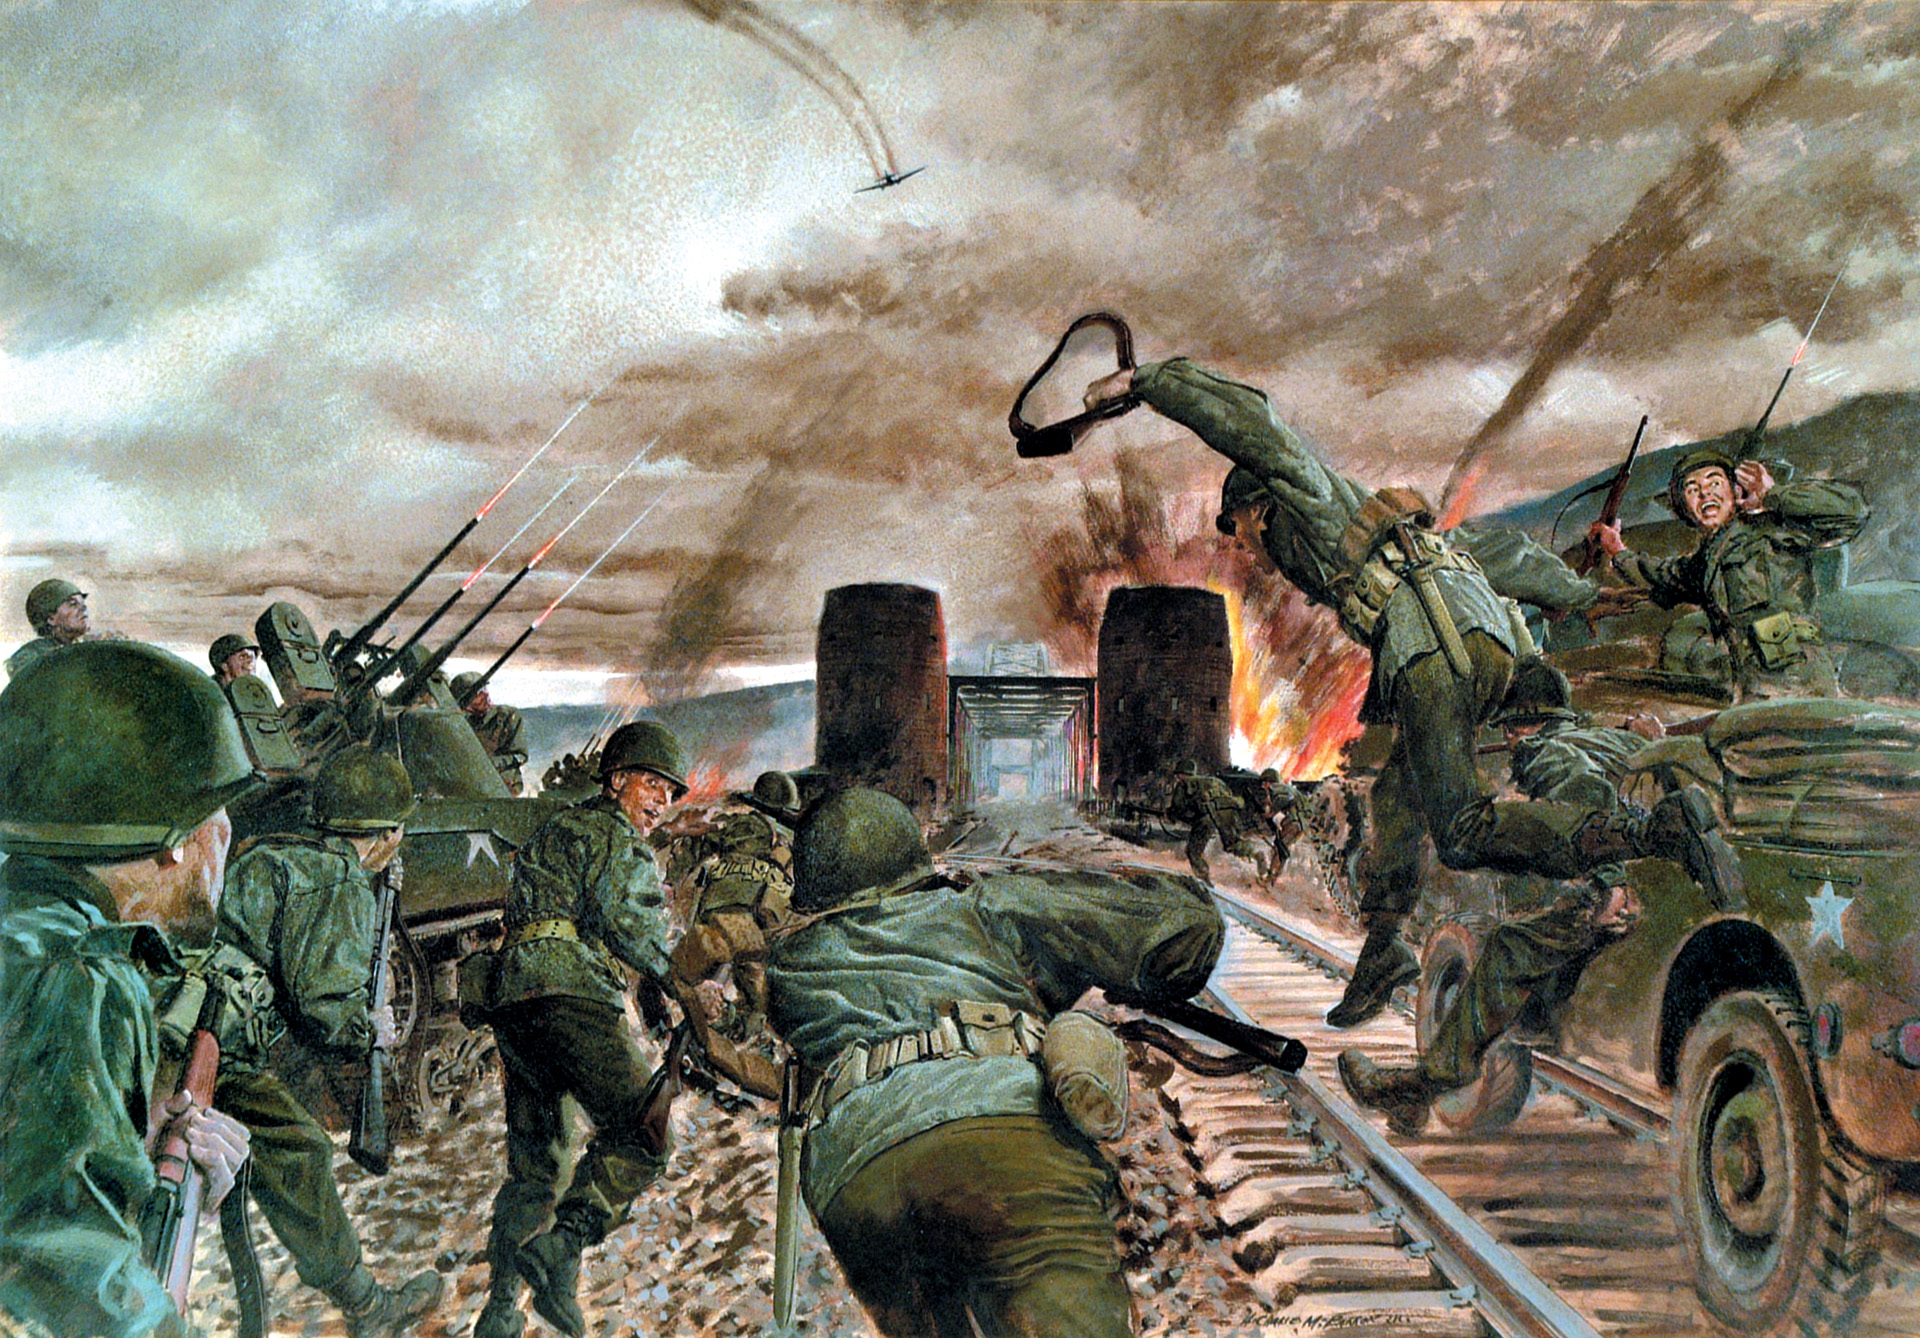 In this action-packed painting by artist H. Charles McBarron, troops of the 9th Armored Division rush to secure the Ludendorff bridge from defending Germans. The G.I.s also disabled explosive charges that were placed by the Germans in their failed attempt to demolish the bridge and prevent its falling into Allied hands. 